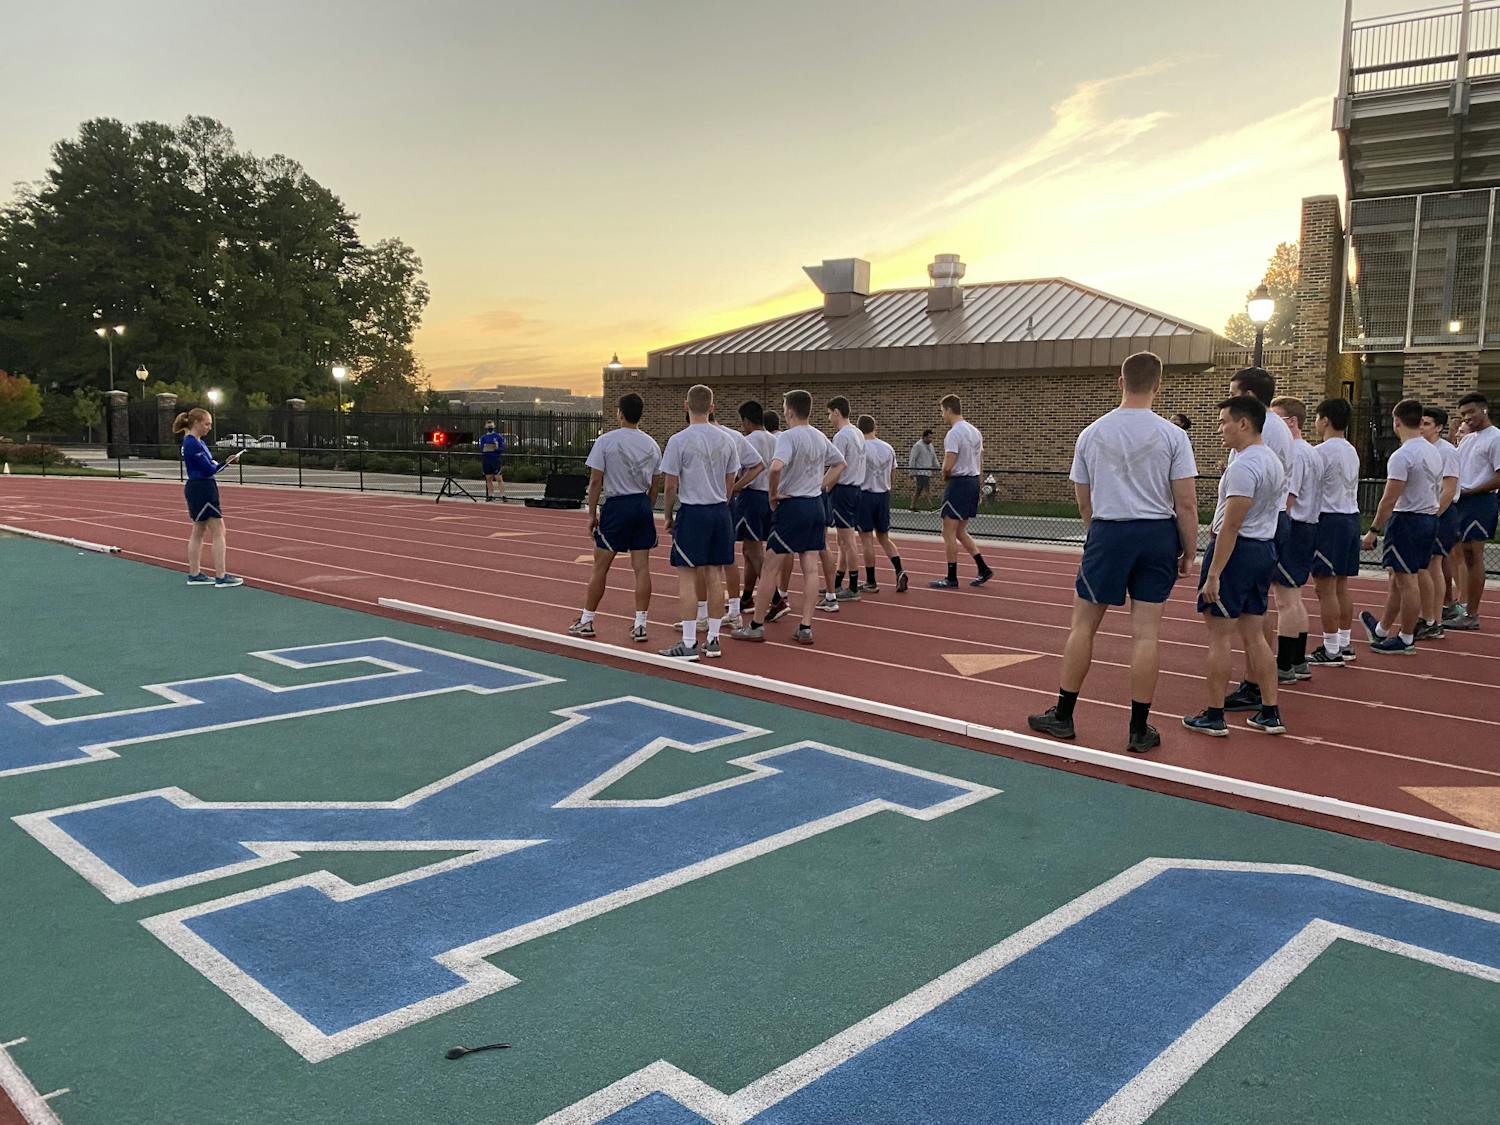 Every week, ROTC students wake up as early as 5 a.m. to start working out by 6 a.m.